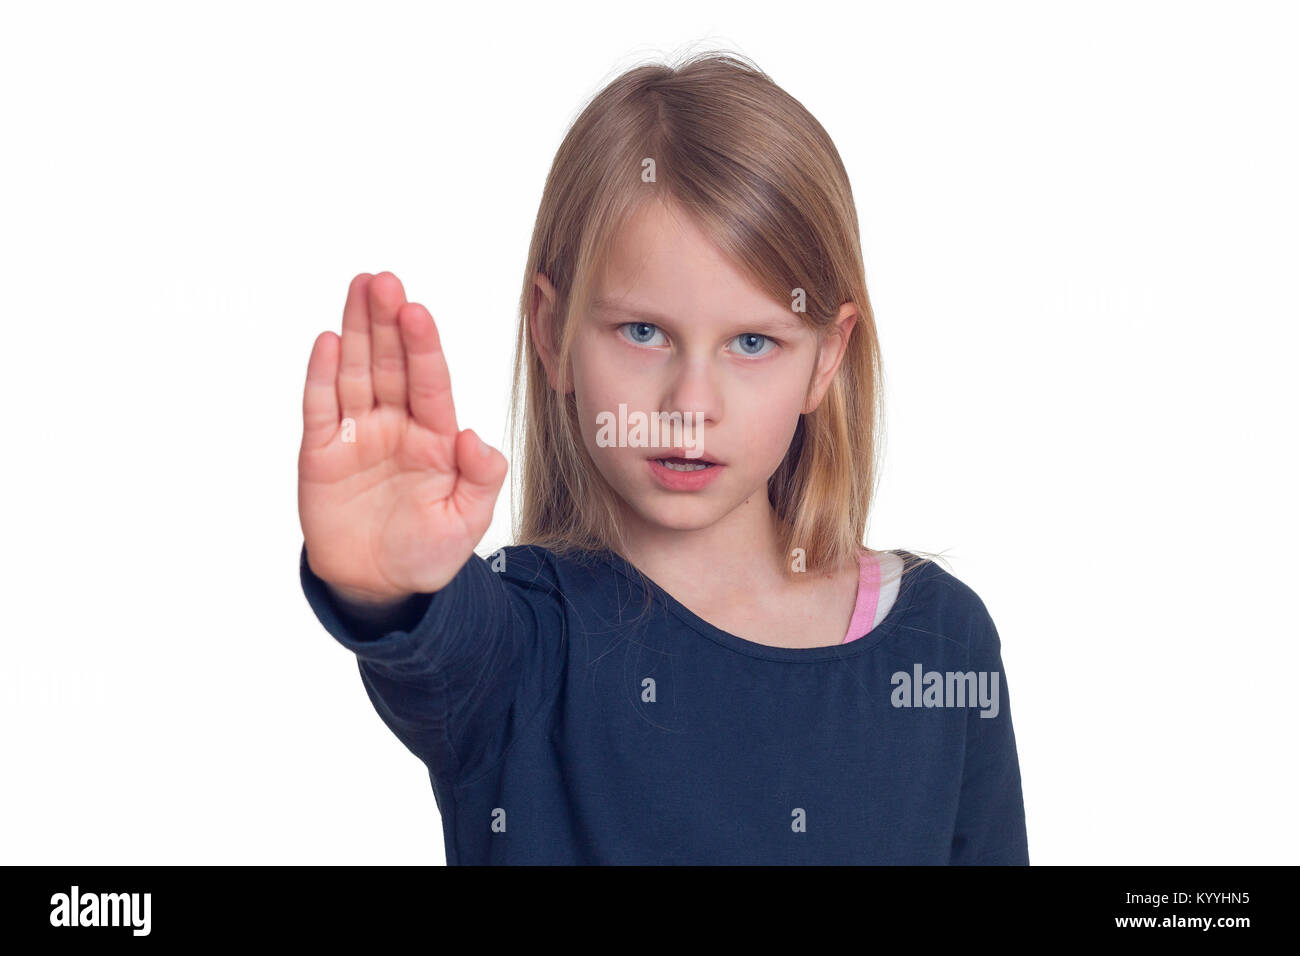 A schoolchild signals stop with the raised hand, Portrait Stock Photo